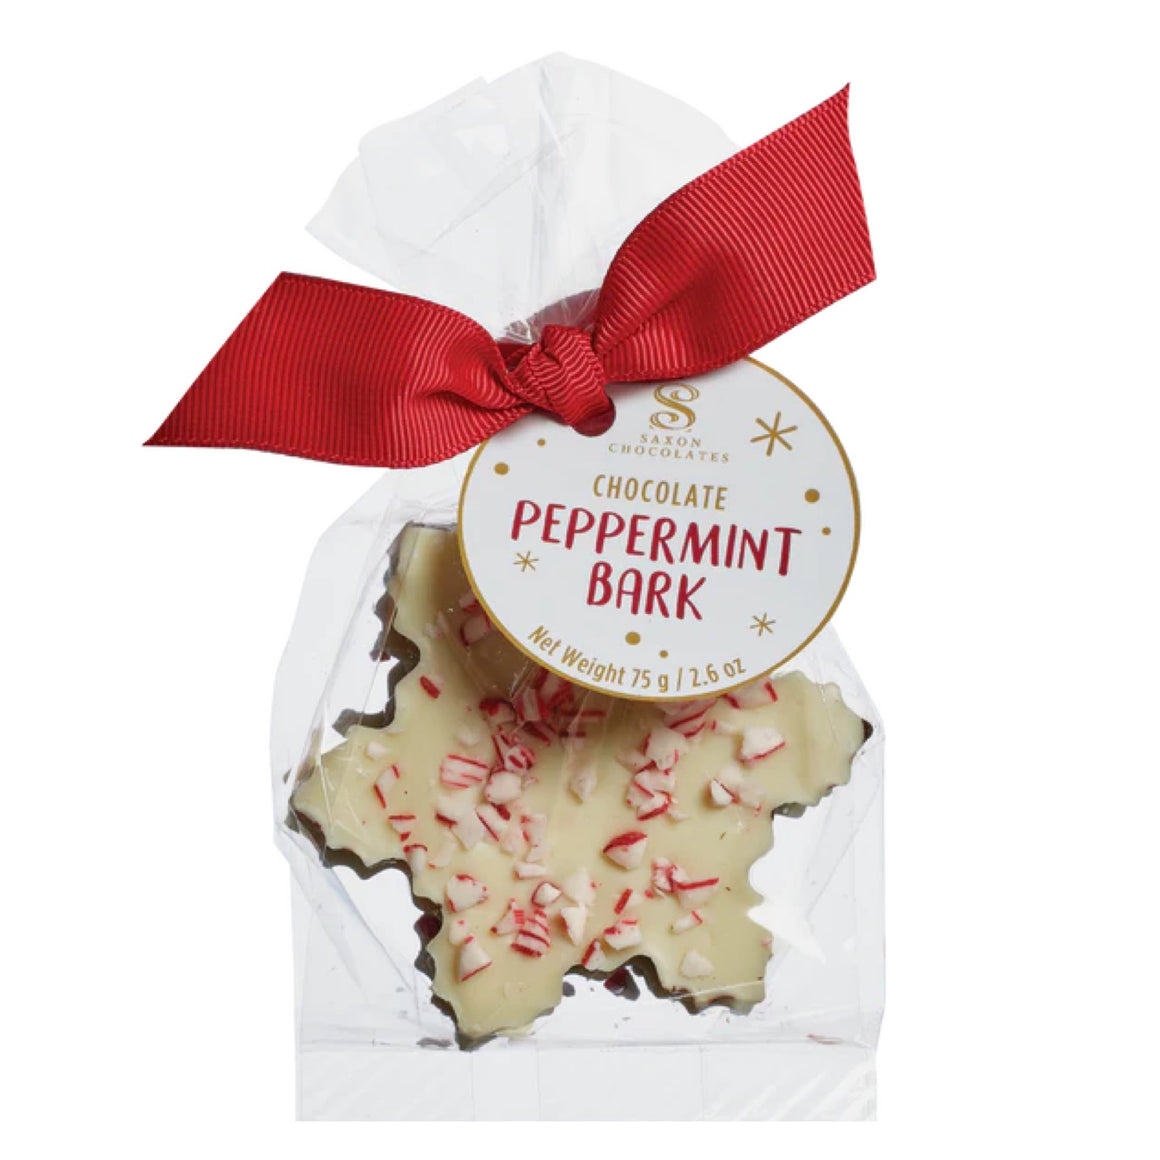 ARTISANAL CONFECTIONS - SNOWFLAKE PEPPERMINT CHOCOLATE BARK